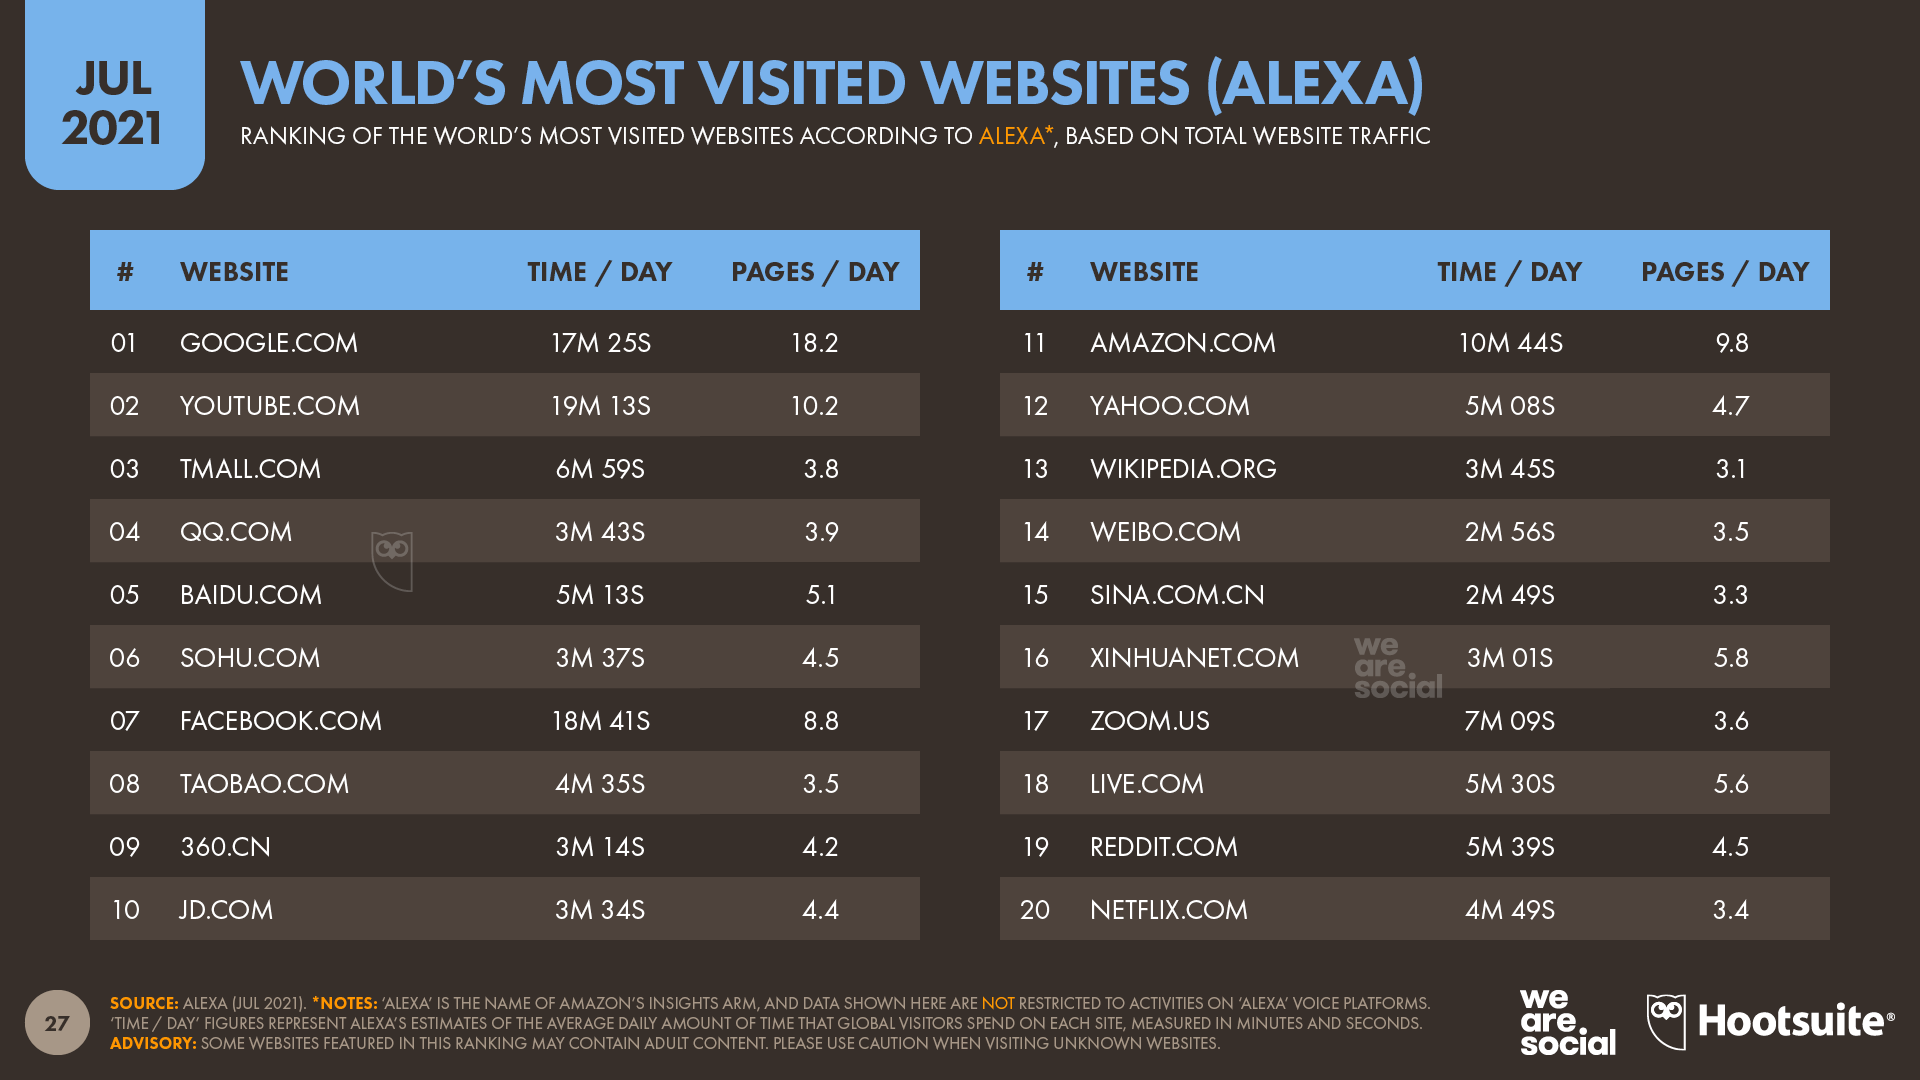 chart showing world's most visited websites (according to Alexa) as of July 2021